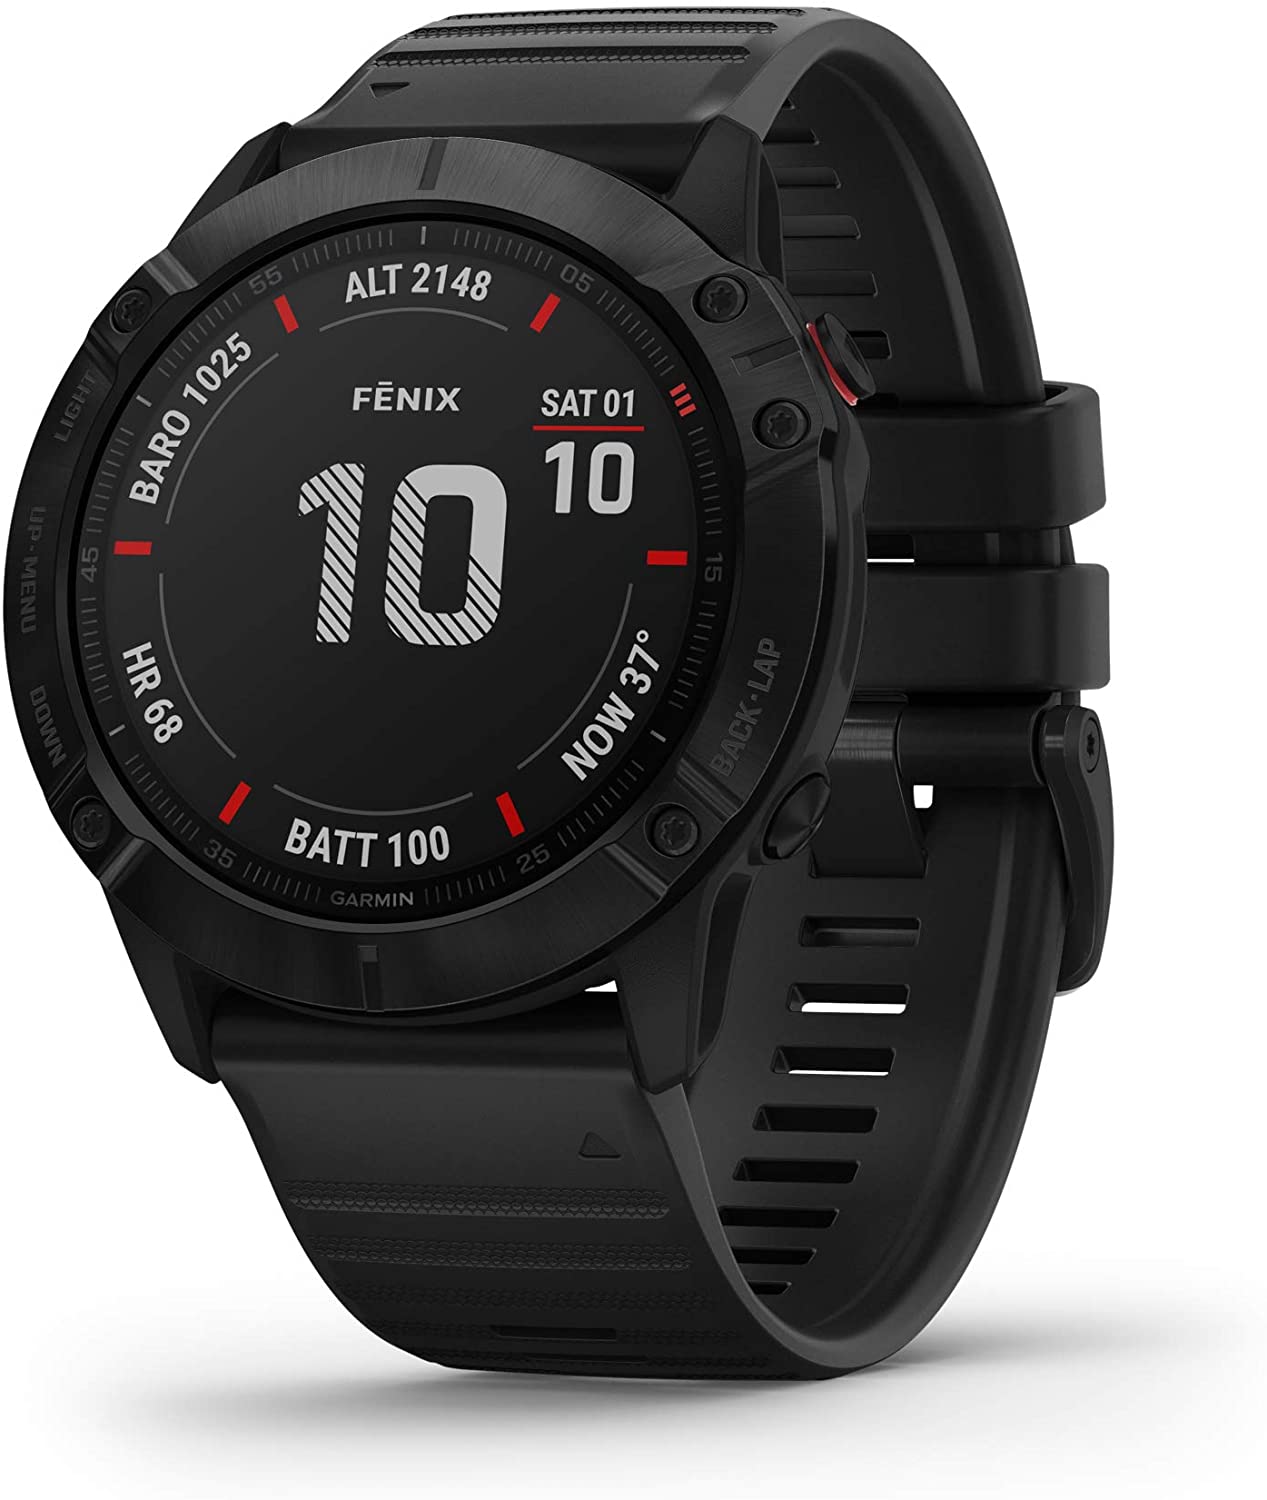 Garmin Fenix 6 Specifications, Features and Price - Geeky Wrist